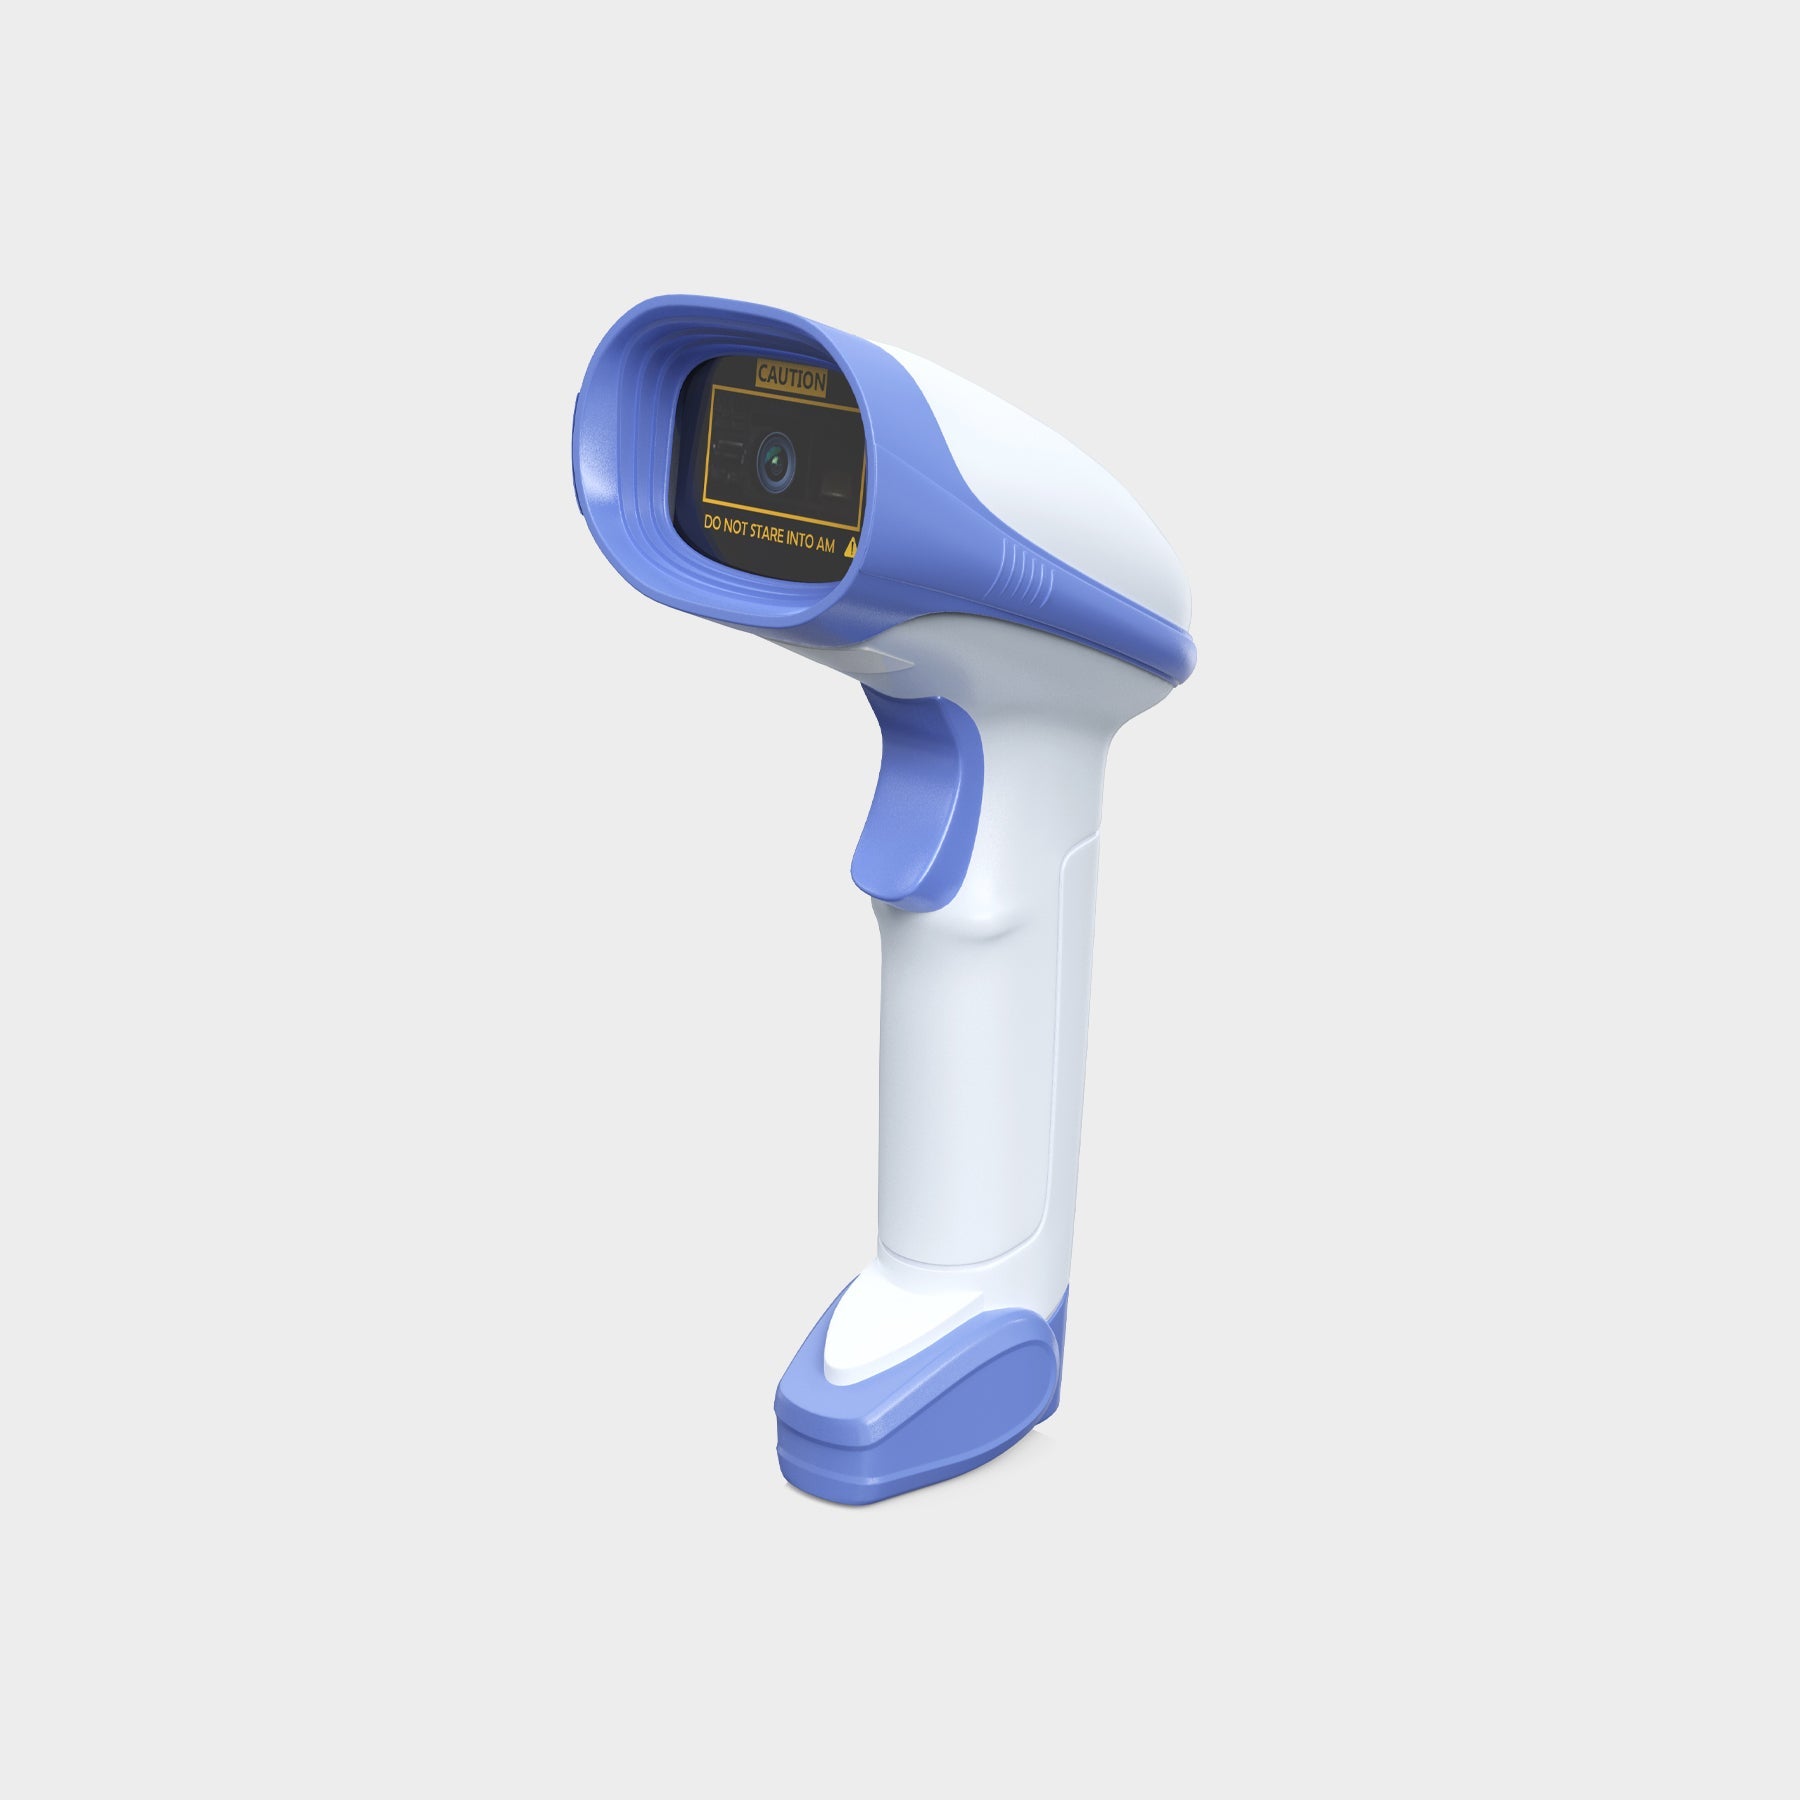 AMBIR BR200 Wireless Barcode Scanner with 2.4Ghz with Wireless USB Dongle - White/Blue (CBR200-WH) (Copy)